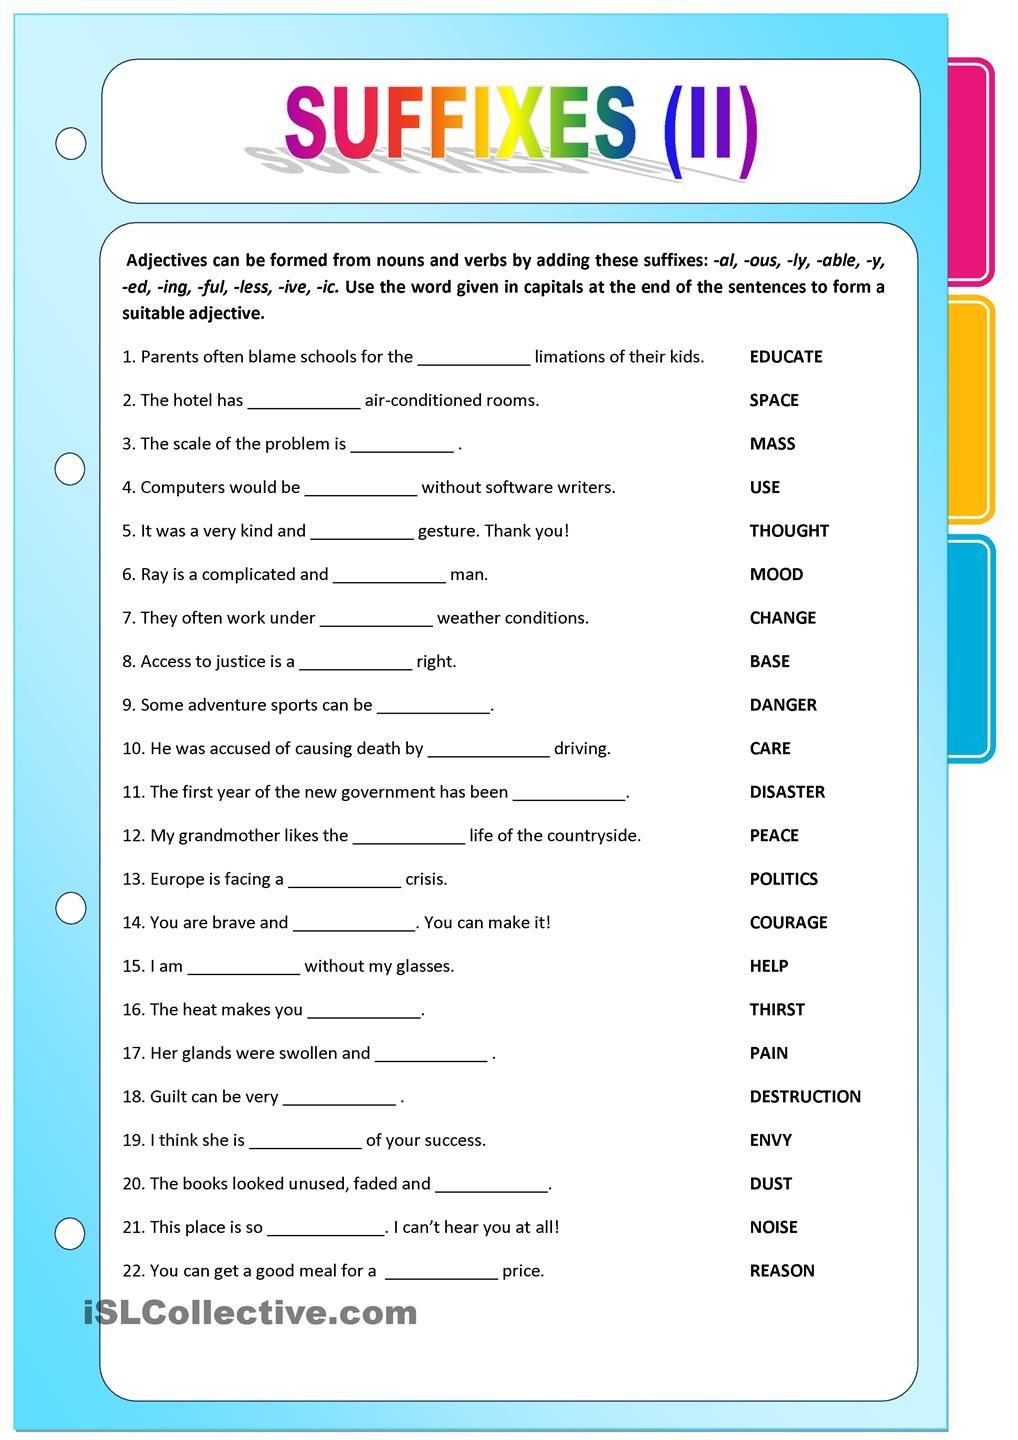 Noun Verb Adjective Worksheet Suffixes 2 Adjectives formed From Nouns and Verbs